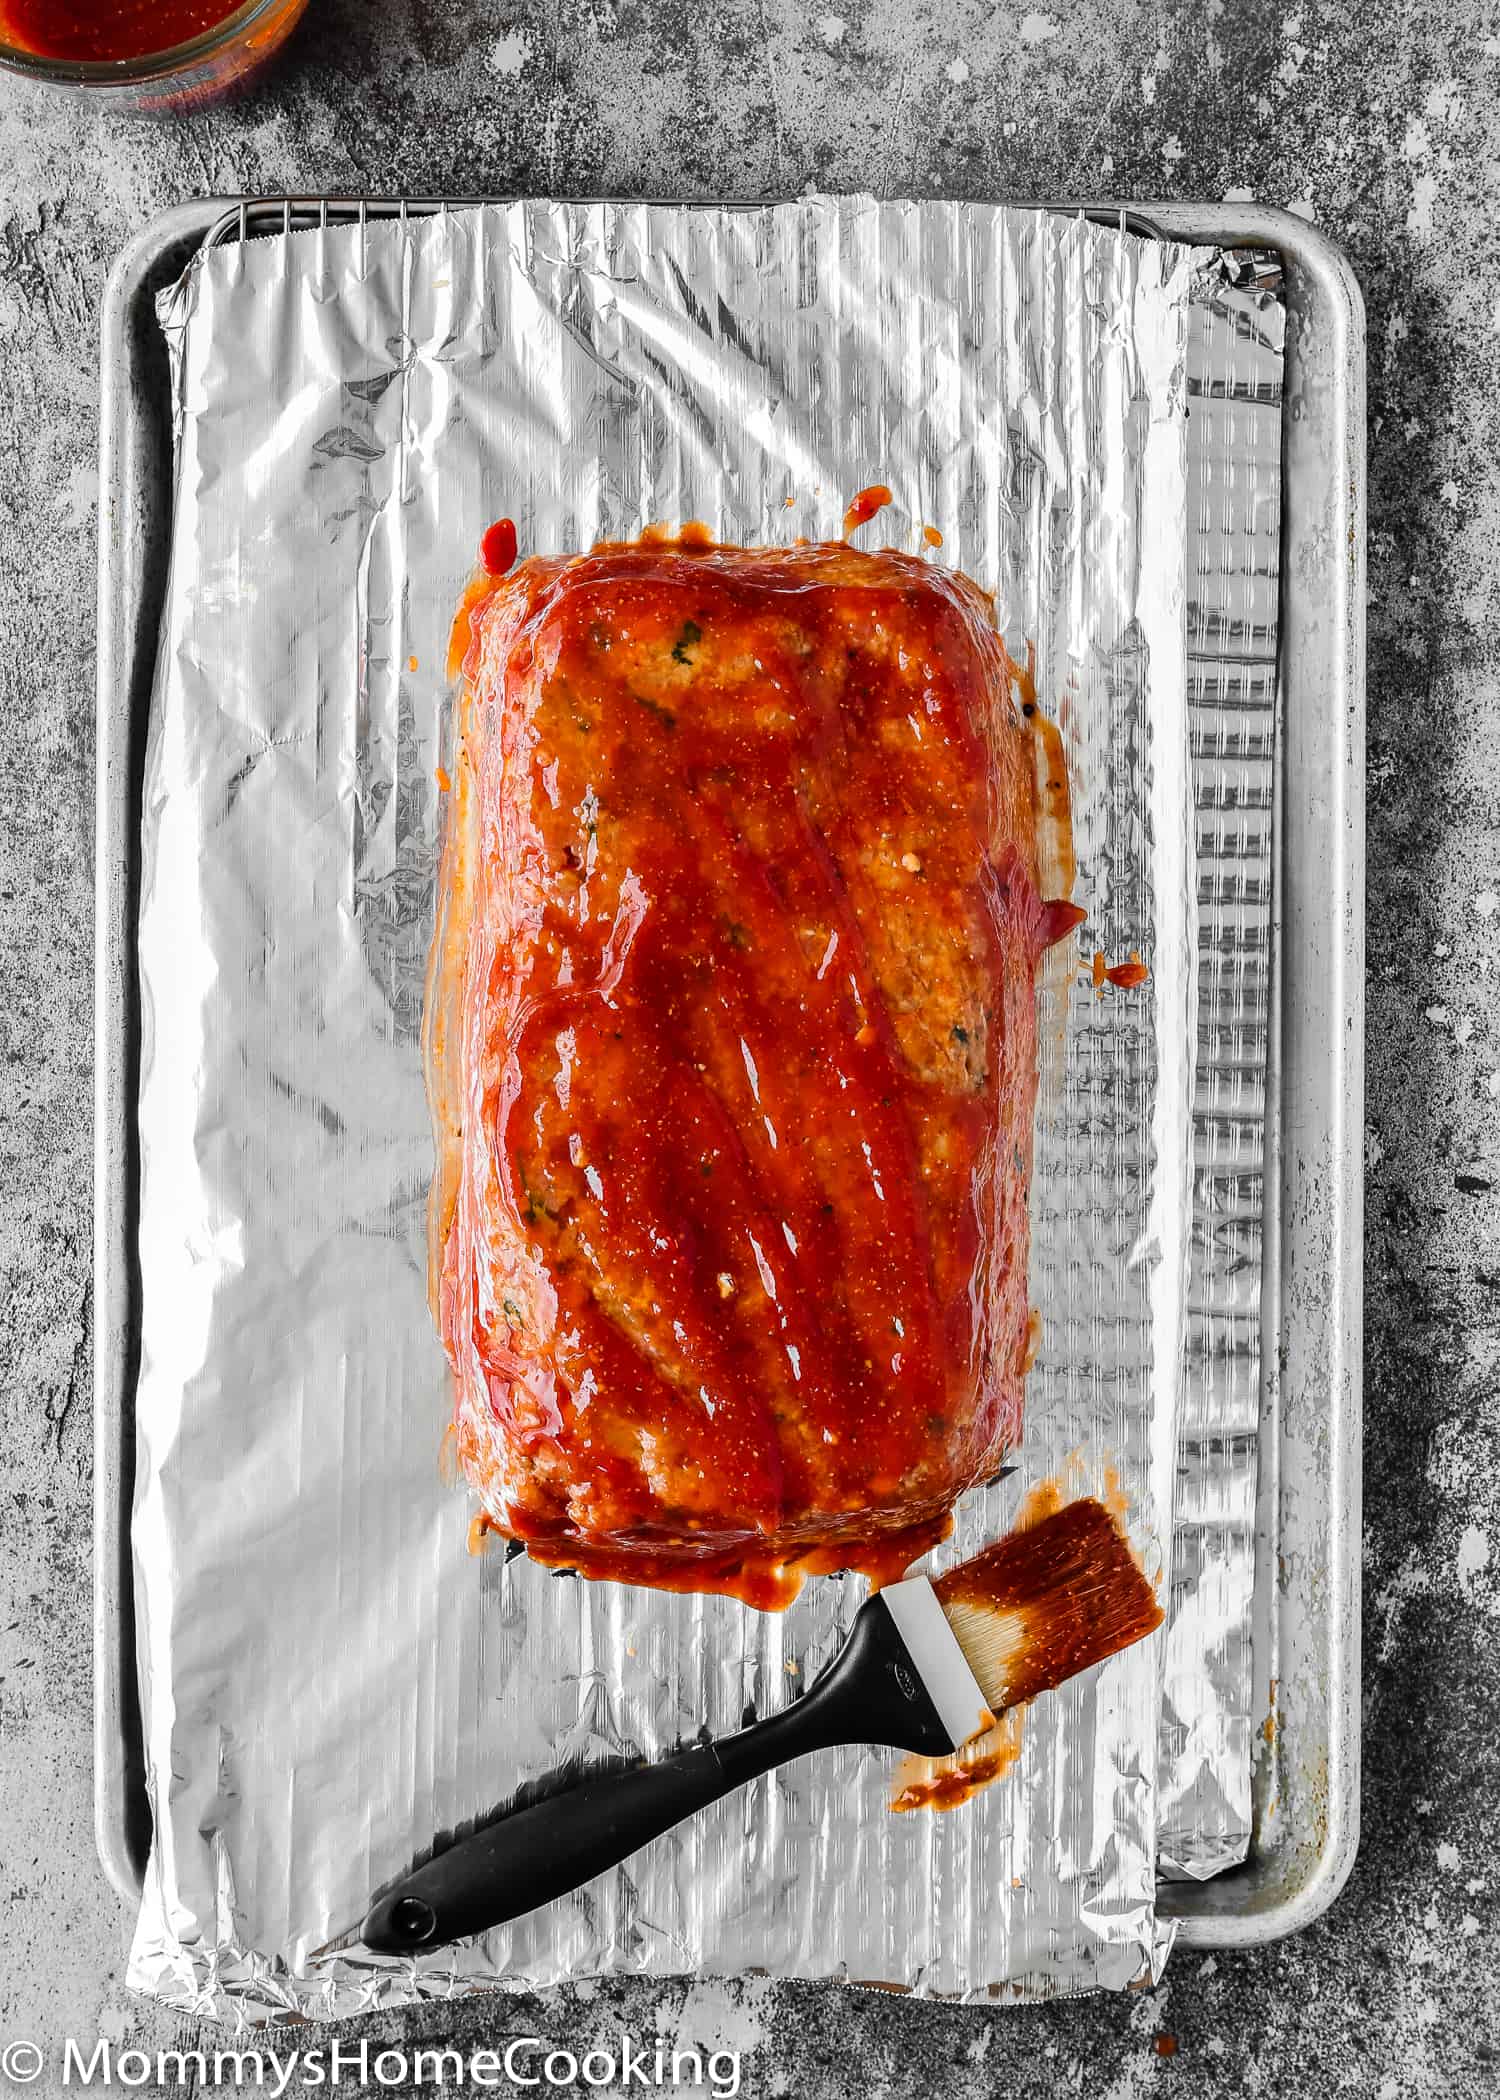  Unbaked Eggless Meatloaf over a baking tray with meatloaf sauce